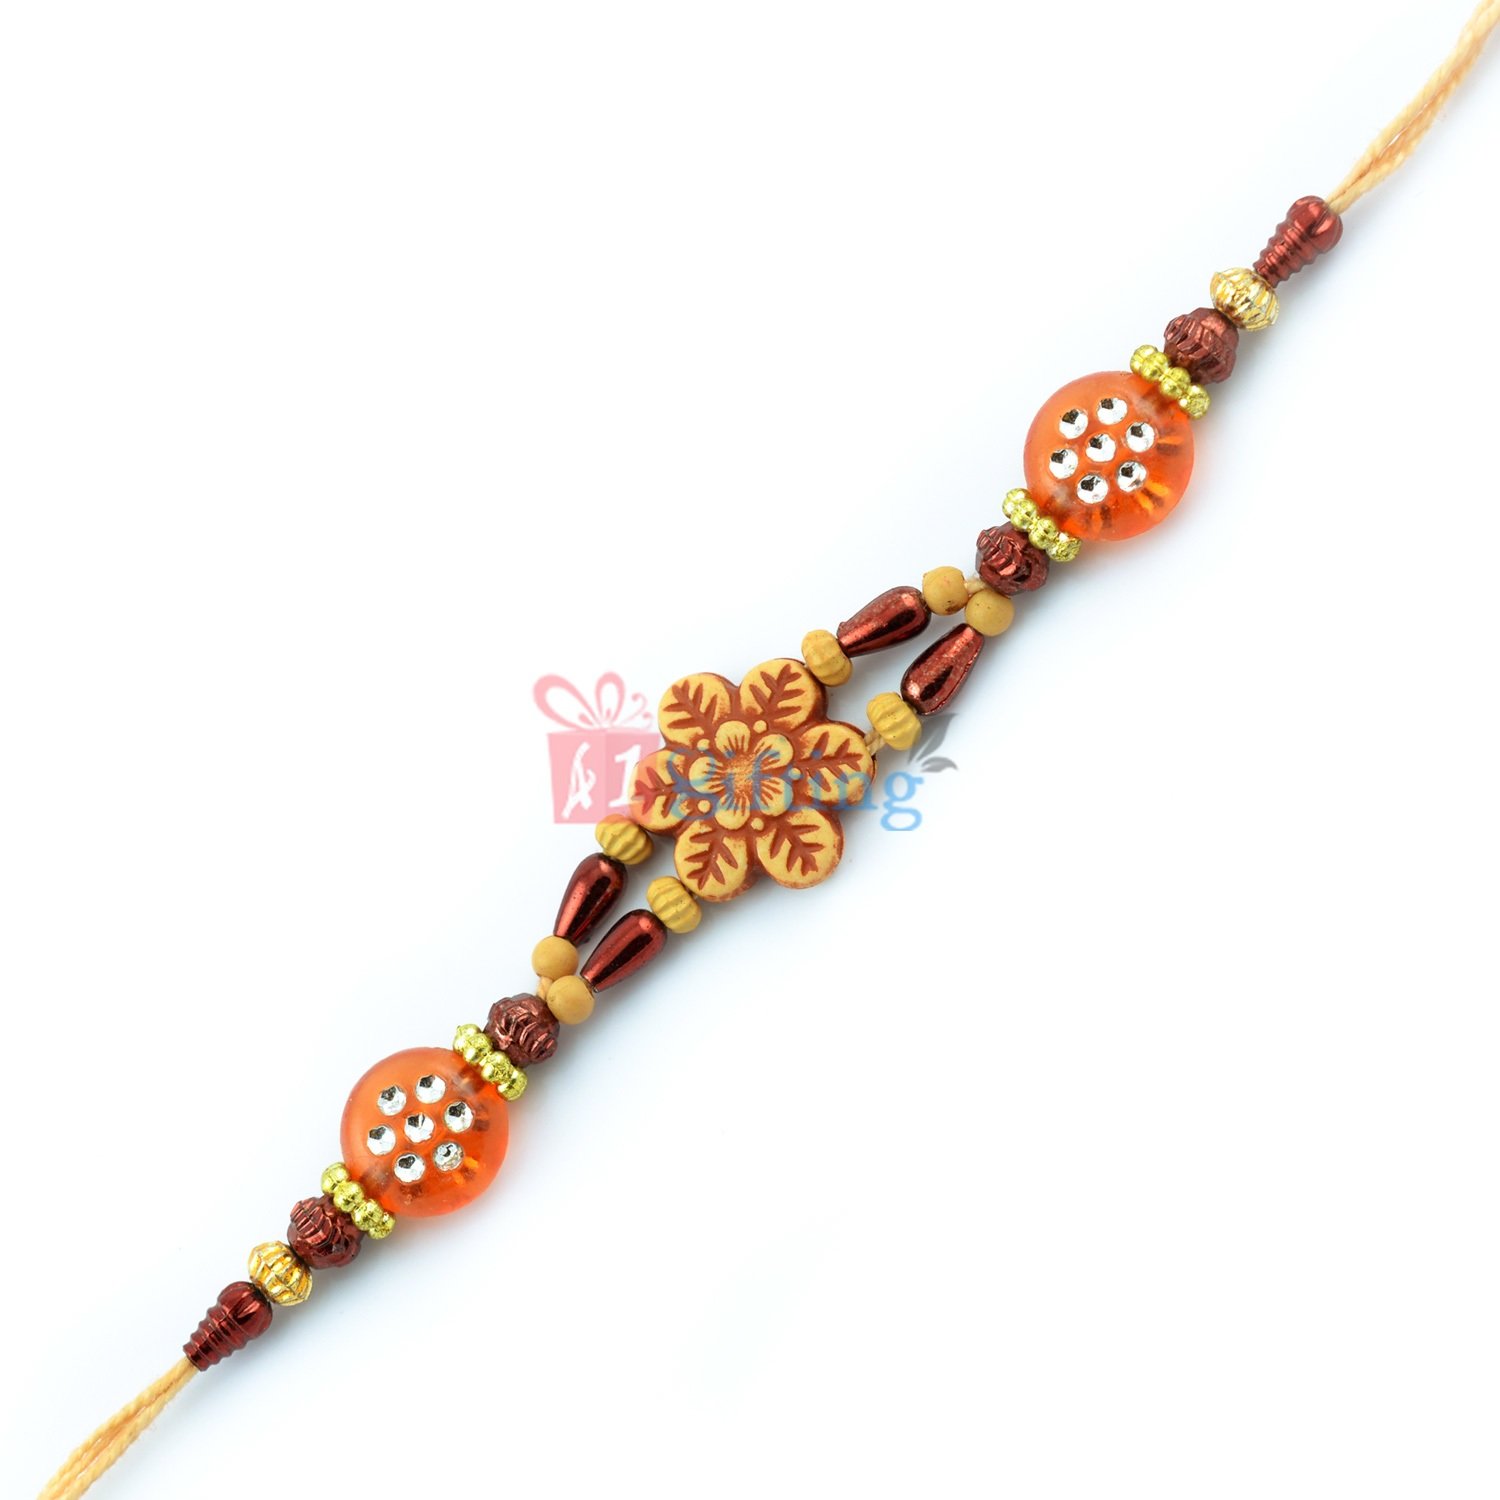 Vibrantly Color Rakhi Thread with Glass and Floral Designer Beads